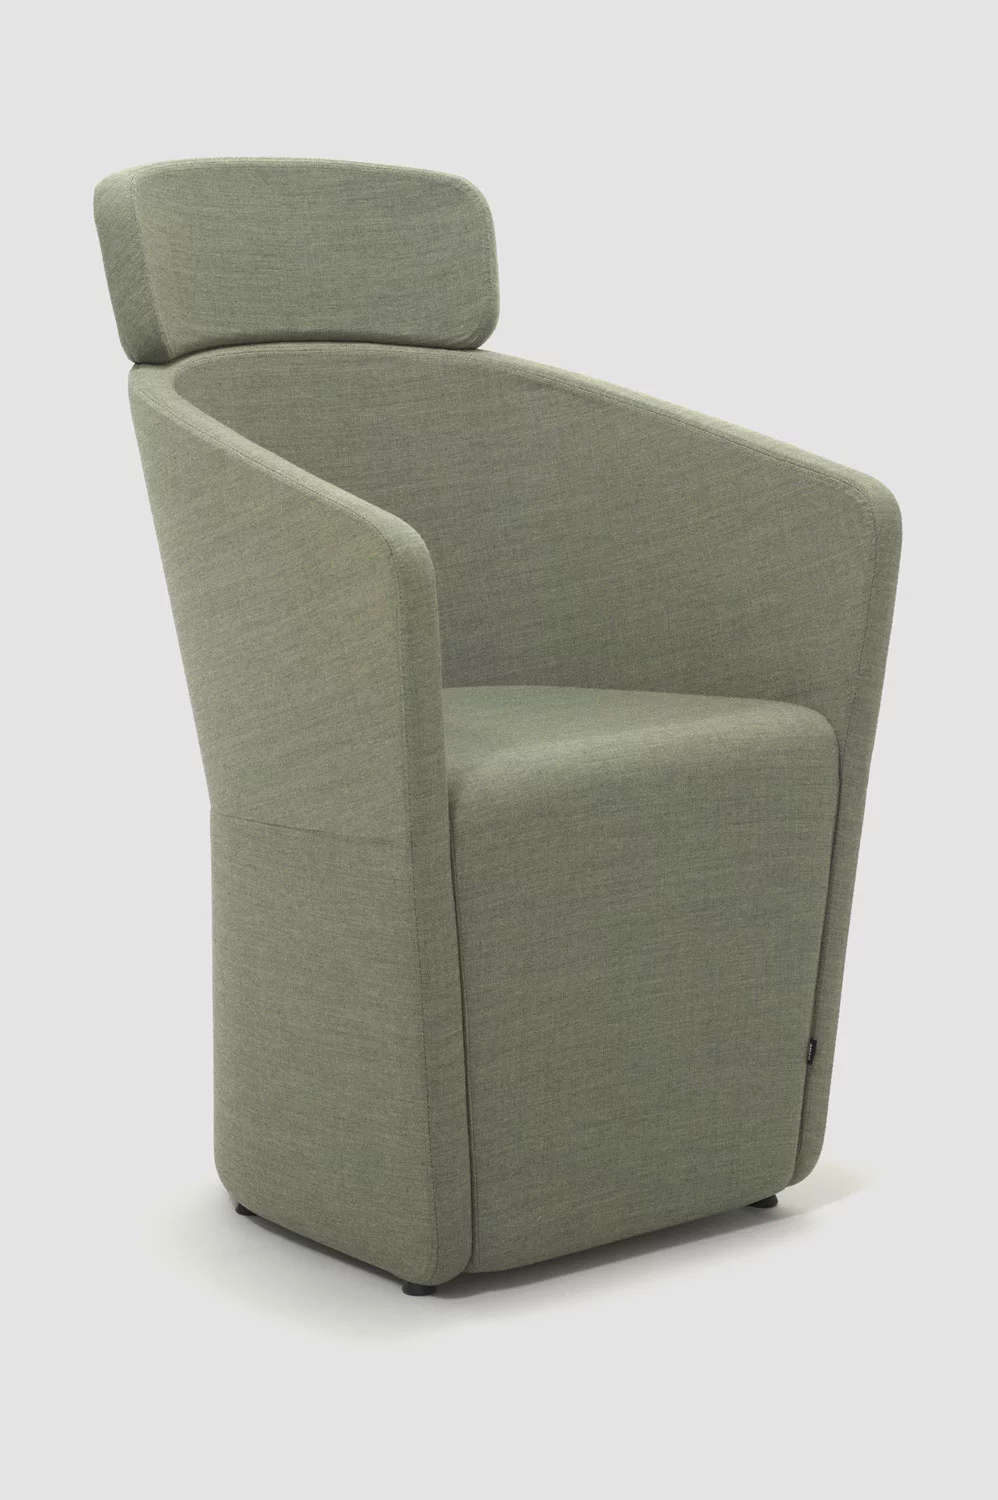 PARCS Club Chair, Upholstered Upholstered chair, Bene Office furniture, Image 3